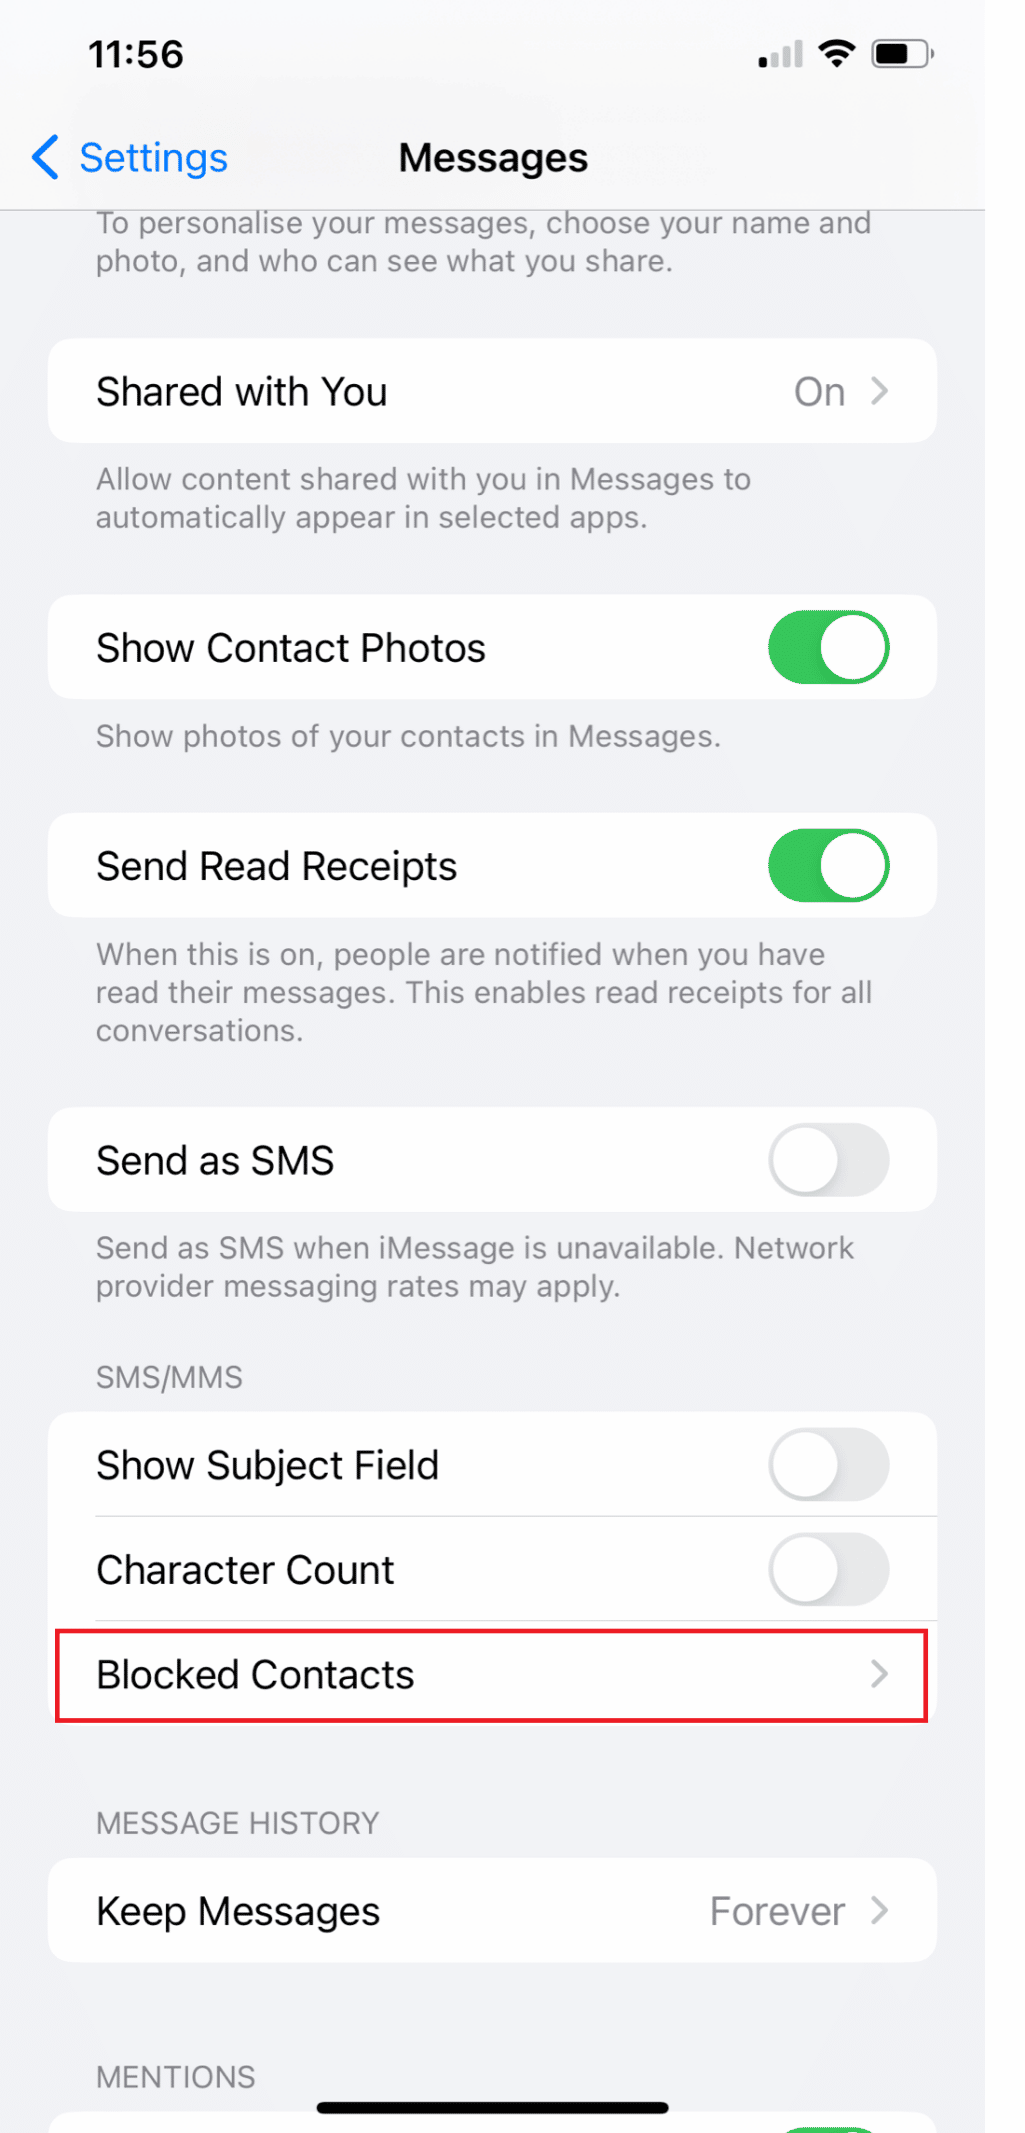 Tap on Blocked Contacts